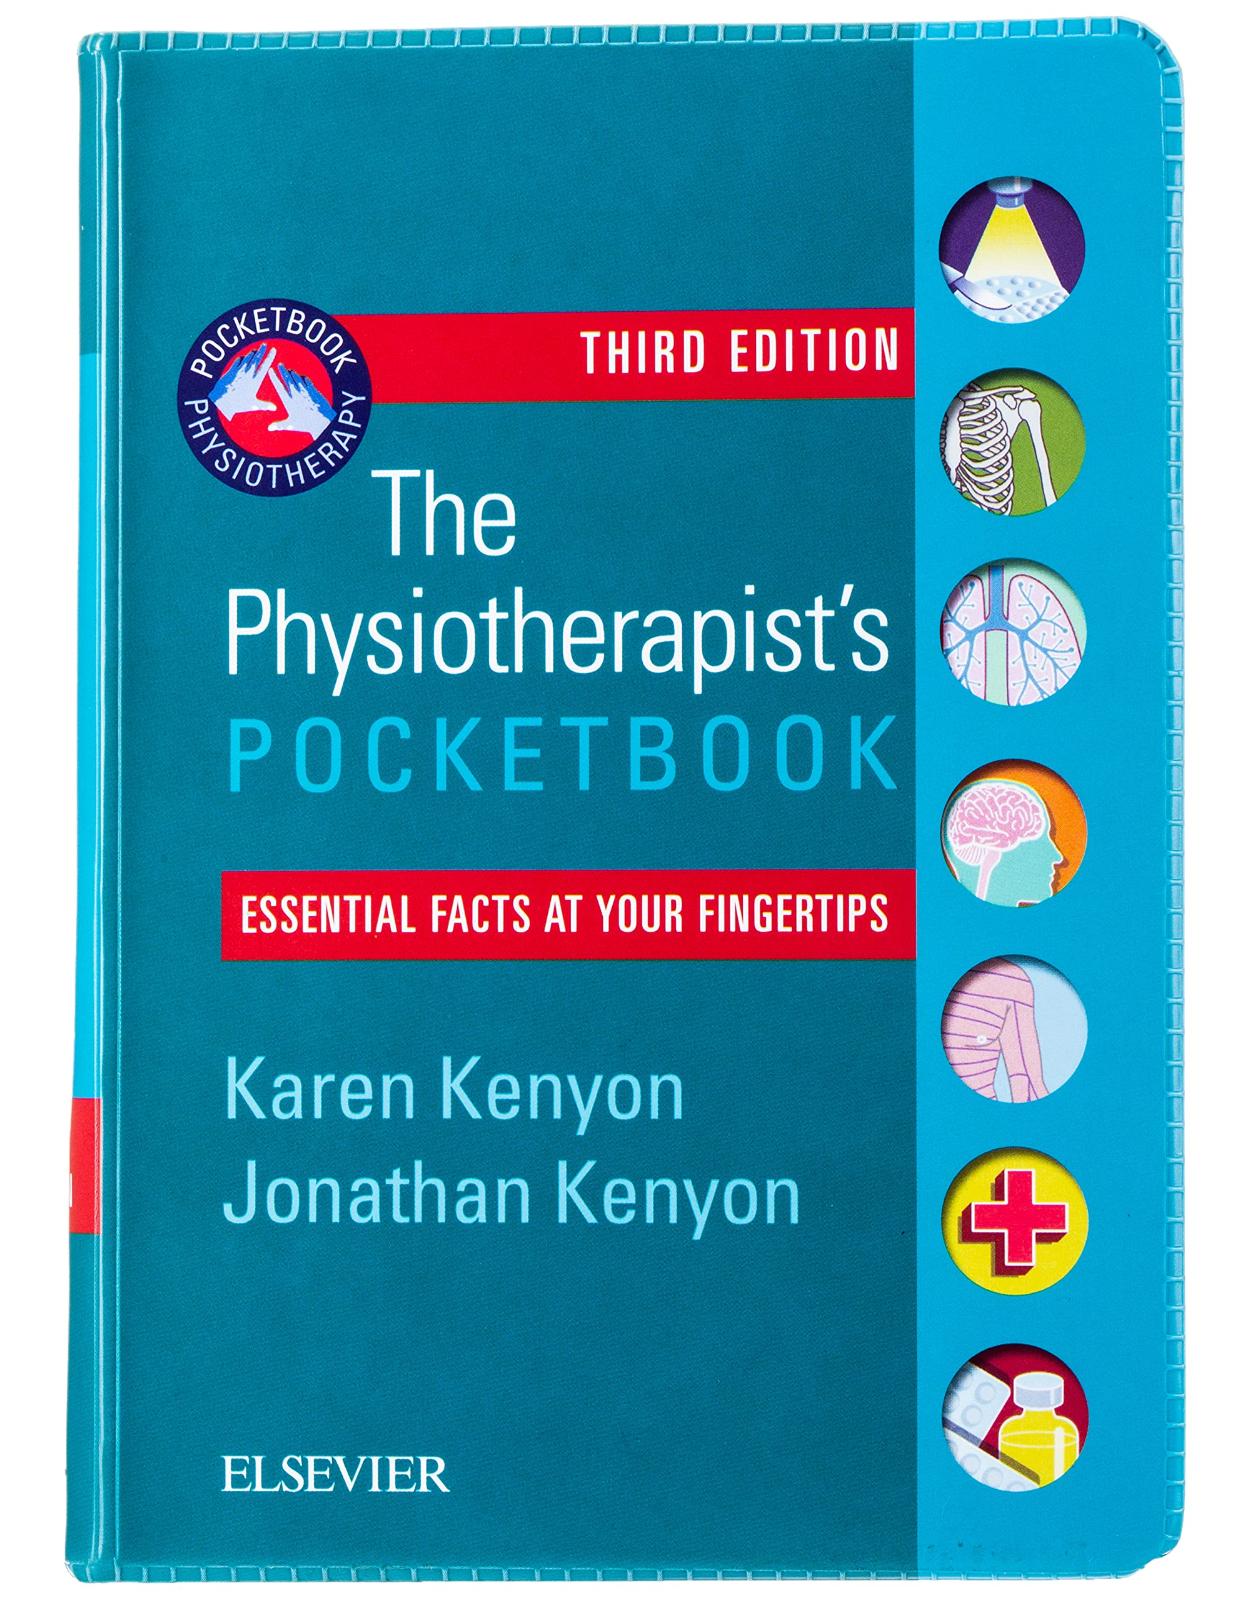 The Physiotherapist's Pocketbook: Essential Facts at Your Fingertips, 3e